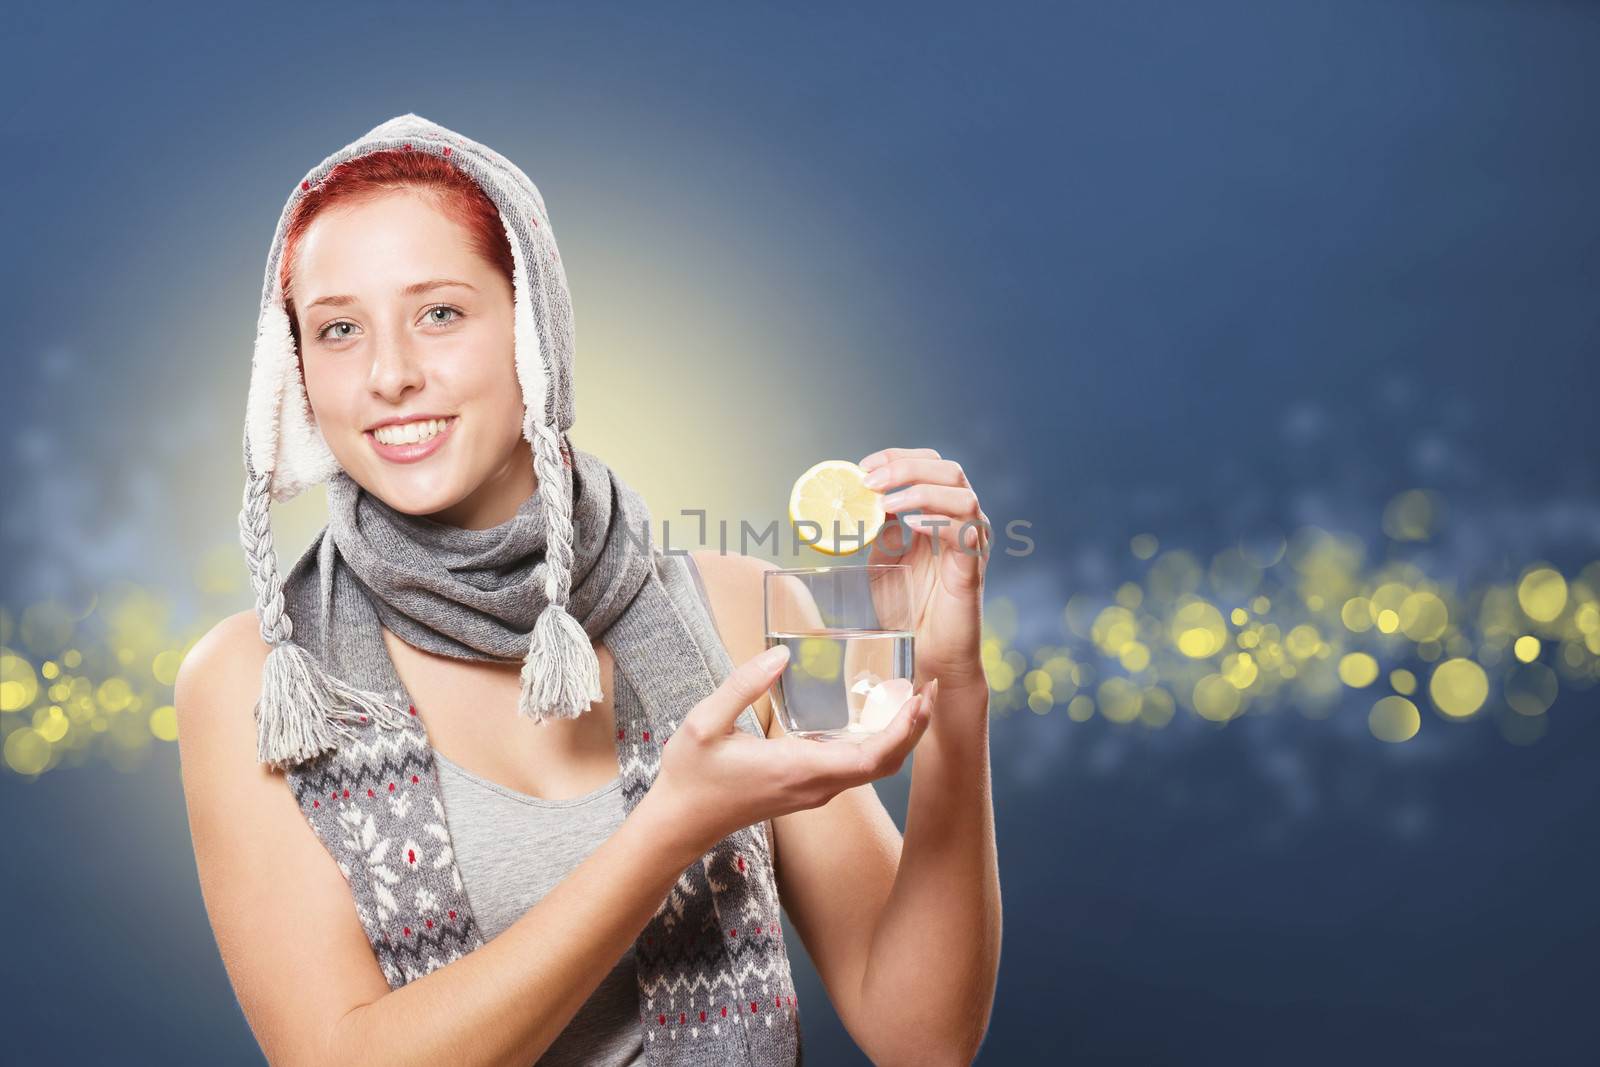 woman adding a healthy lemon to a glass of water